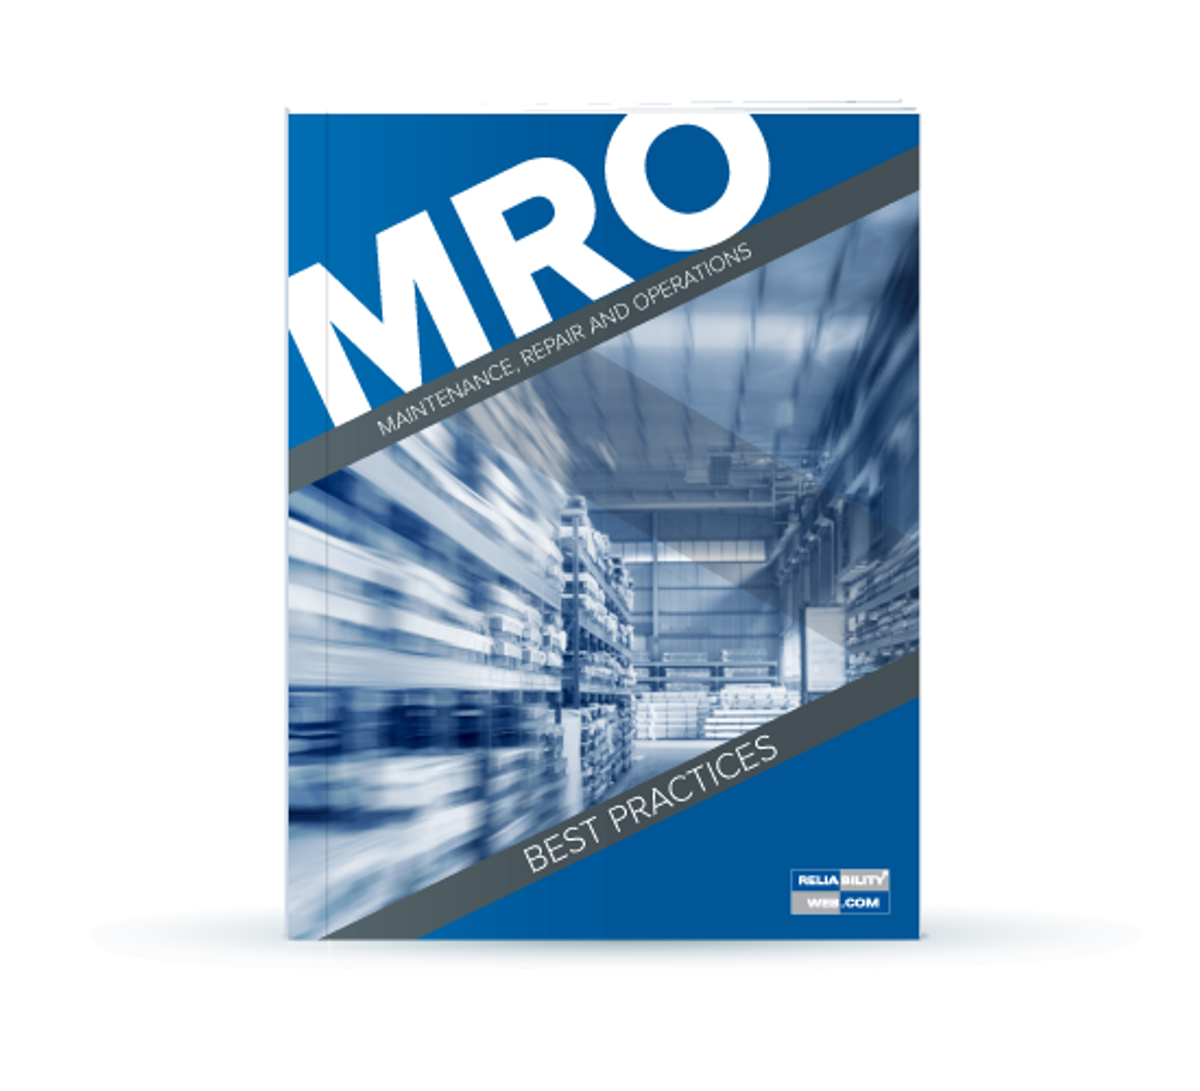 Subscribe and ReceiveThe MRO Best Practices Special Report